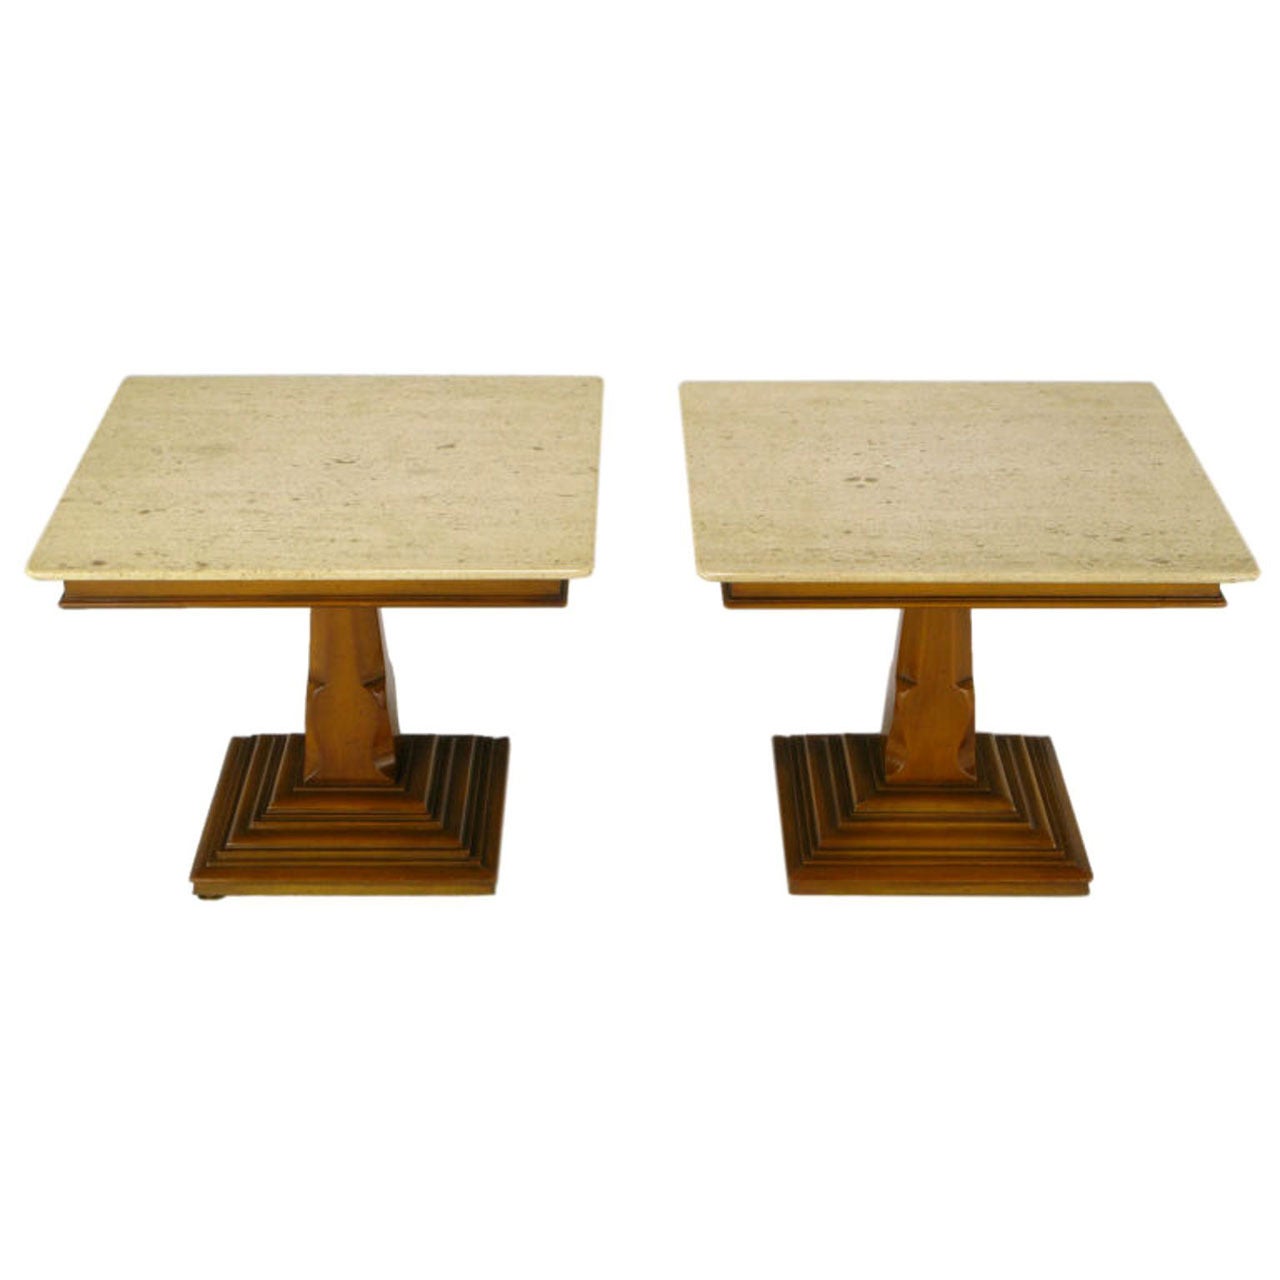 Pair of Spanish Revival Maple and Portuguese Travertine Side Tables For Sale